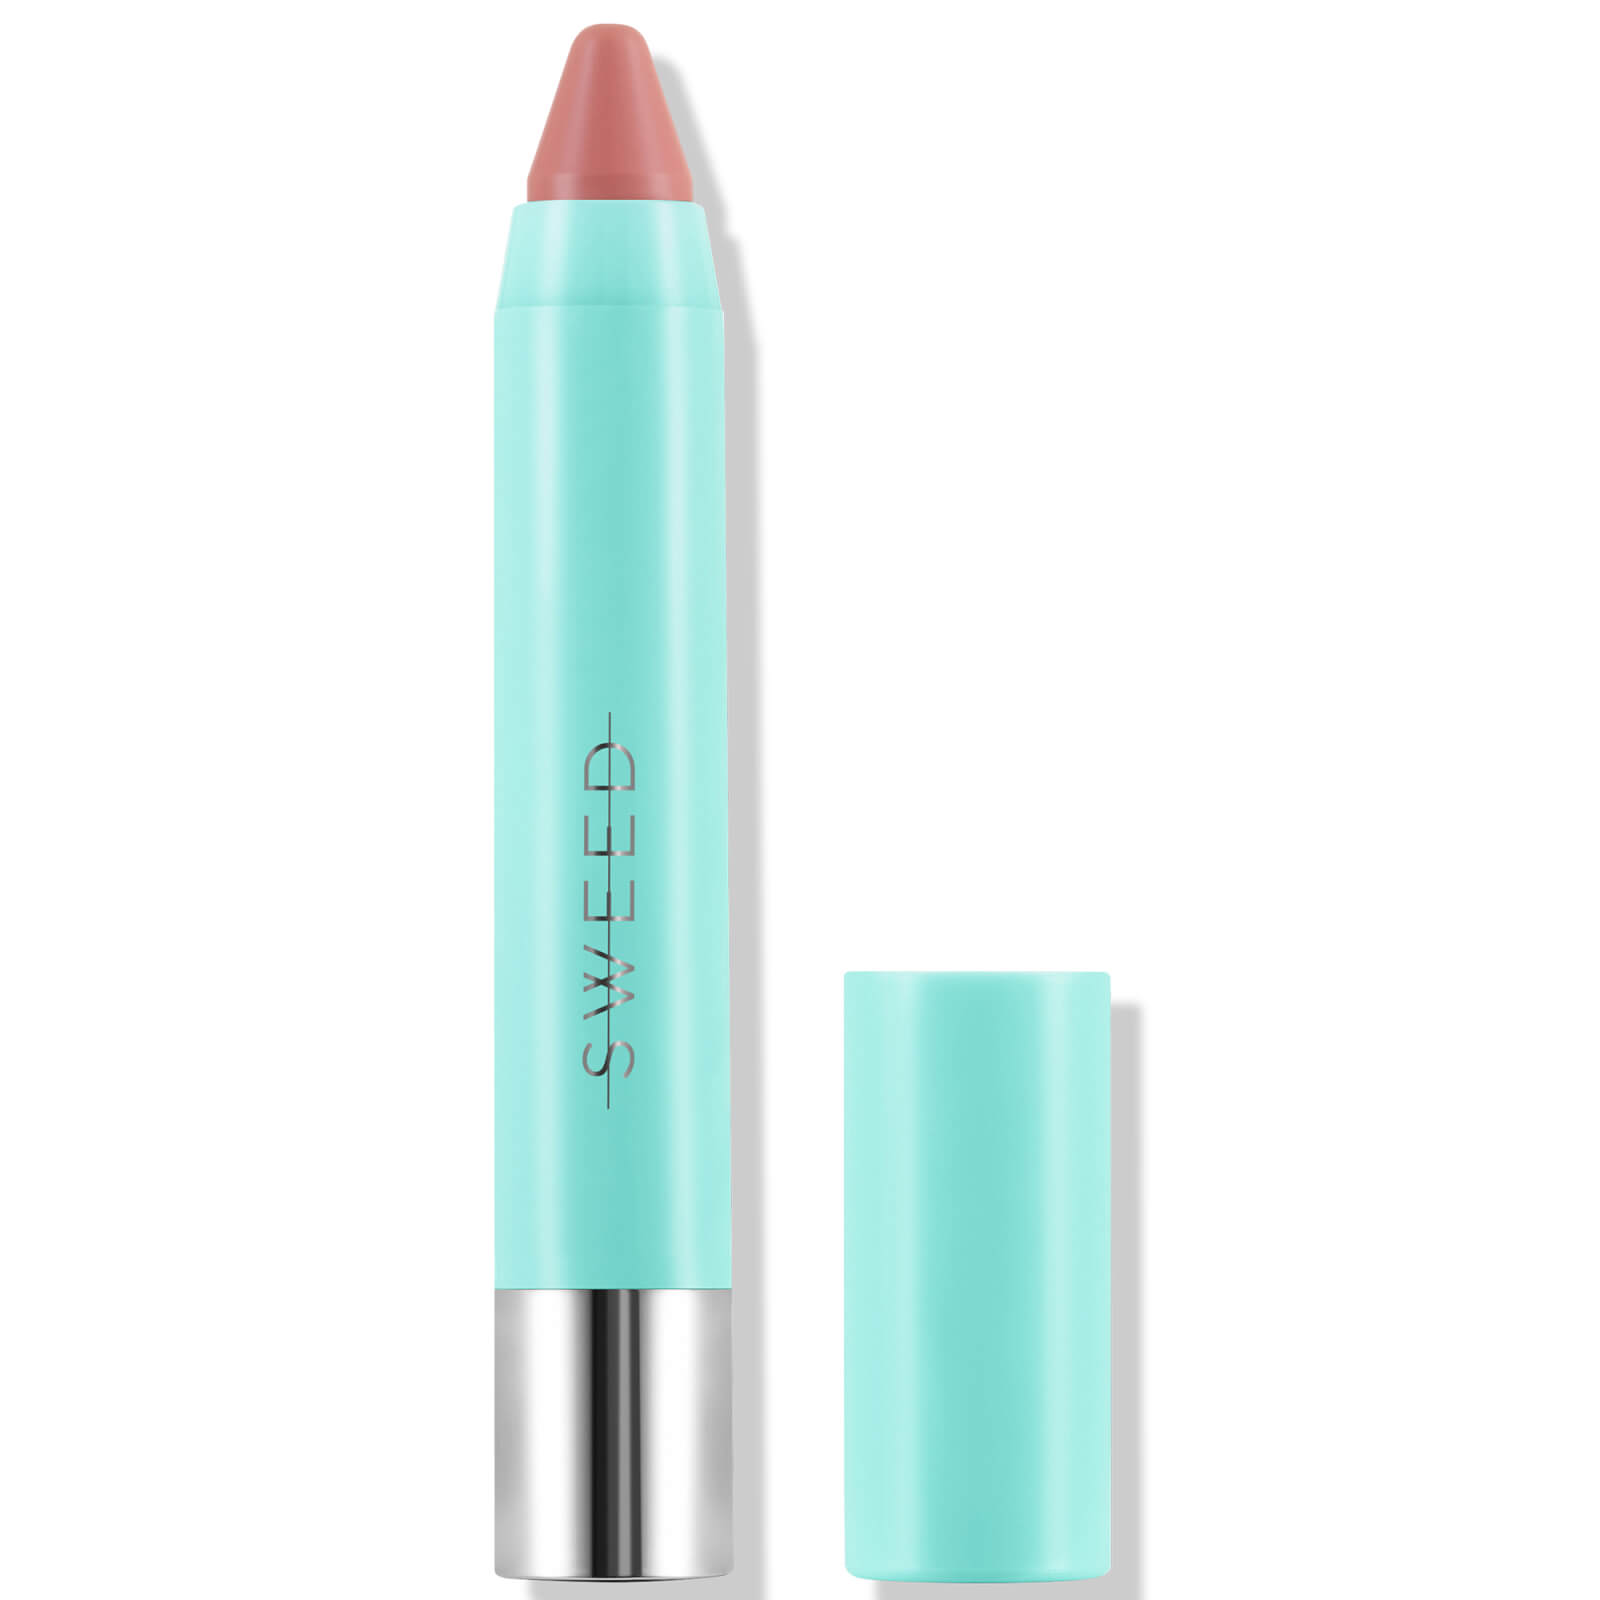 Sweed Le Lipstick 2.5g (various Shades) - Nude Pink